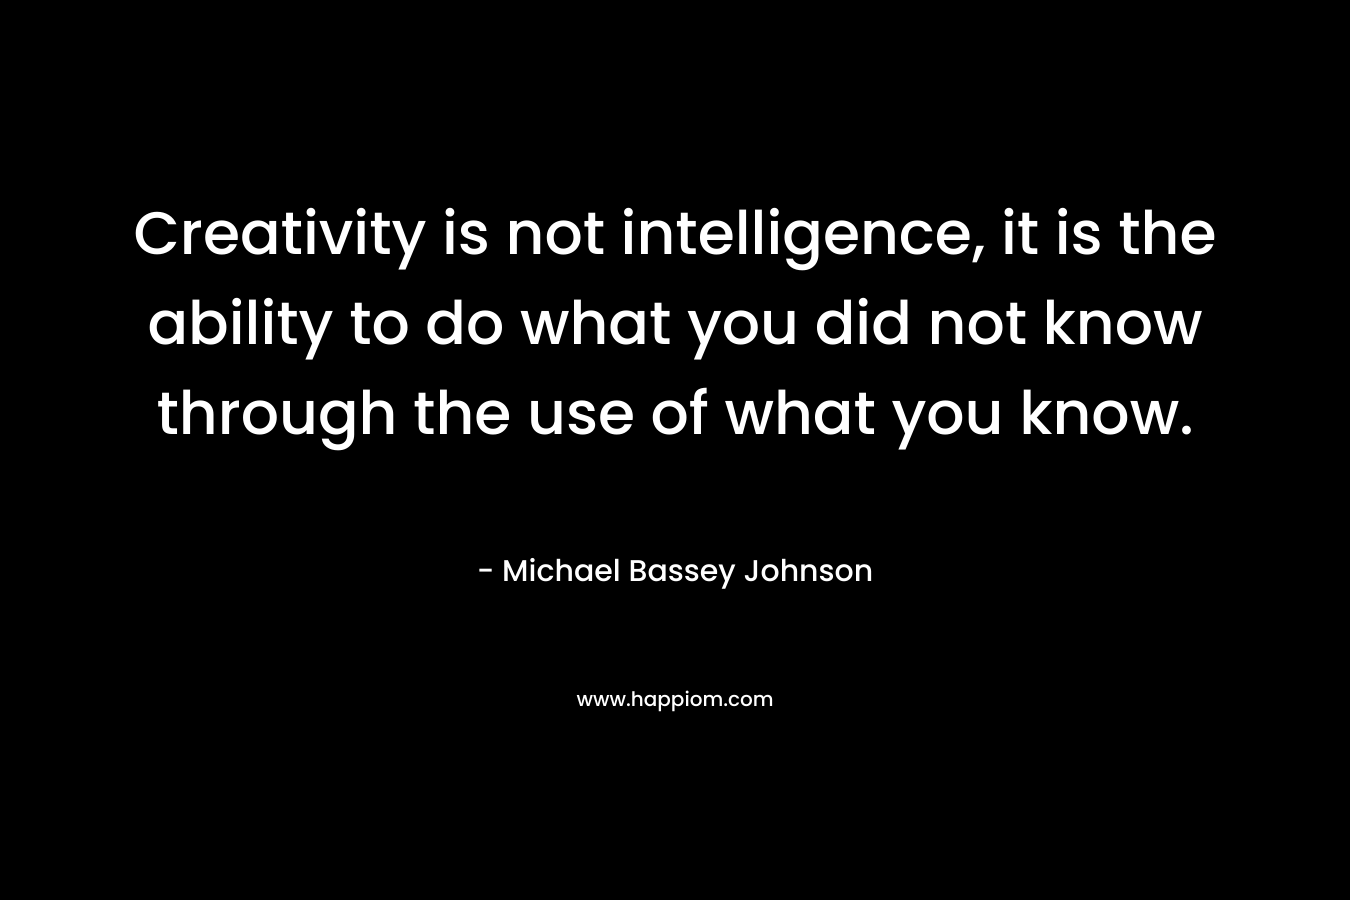 Creativity is not intelligence, it is the ability to do what you did not know through the use of what you know.